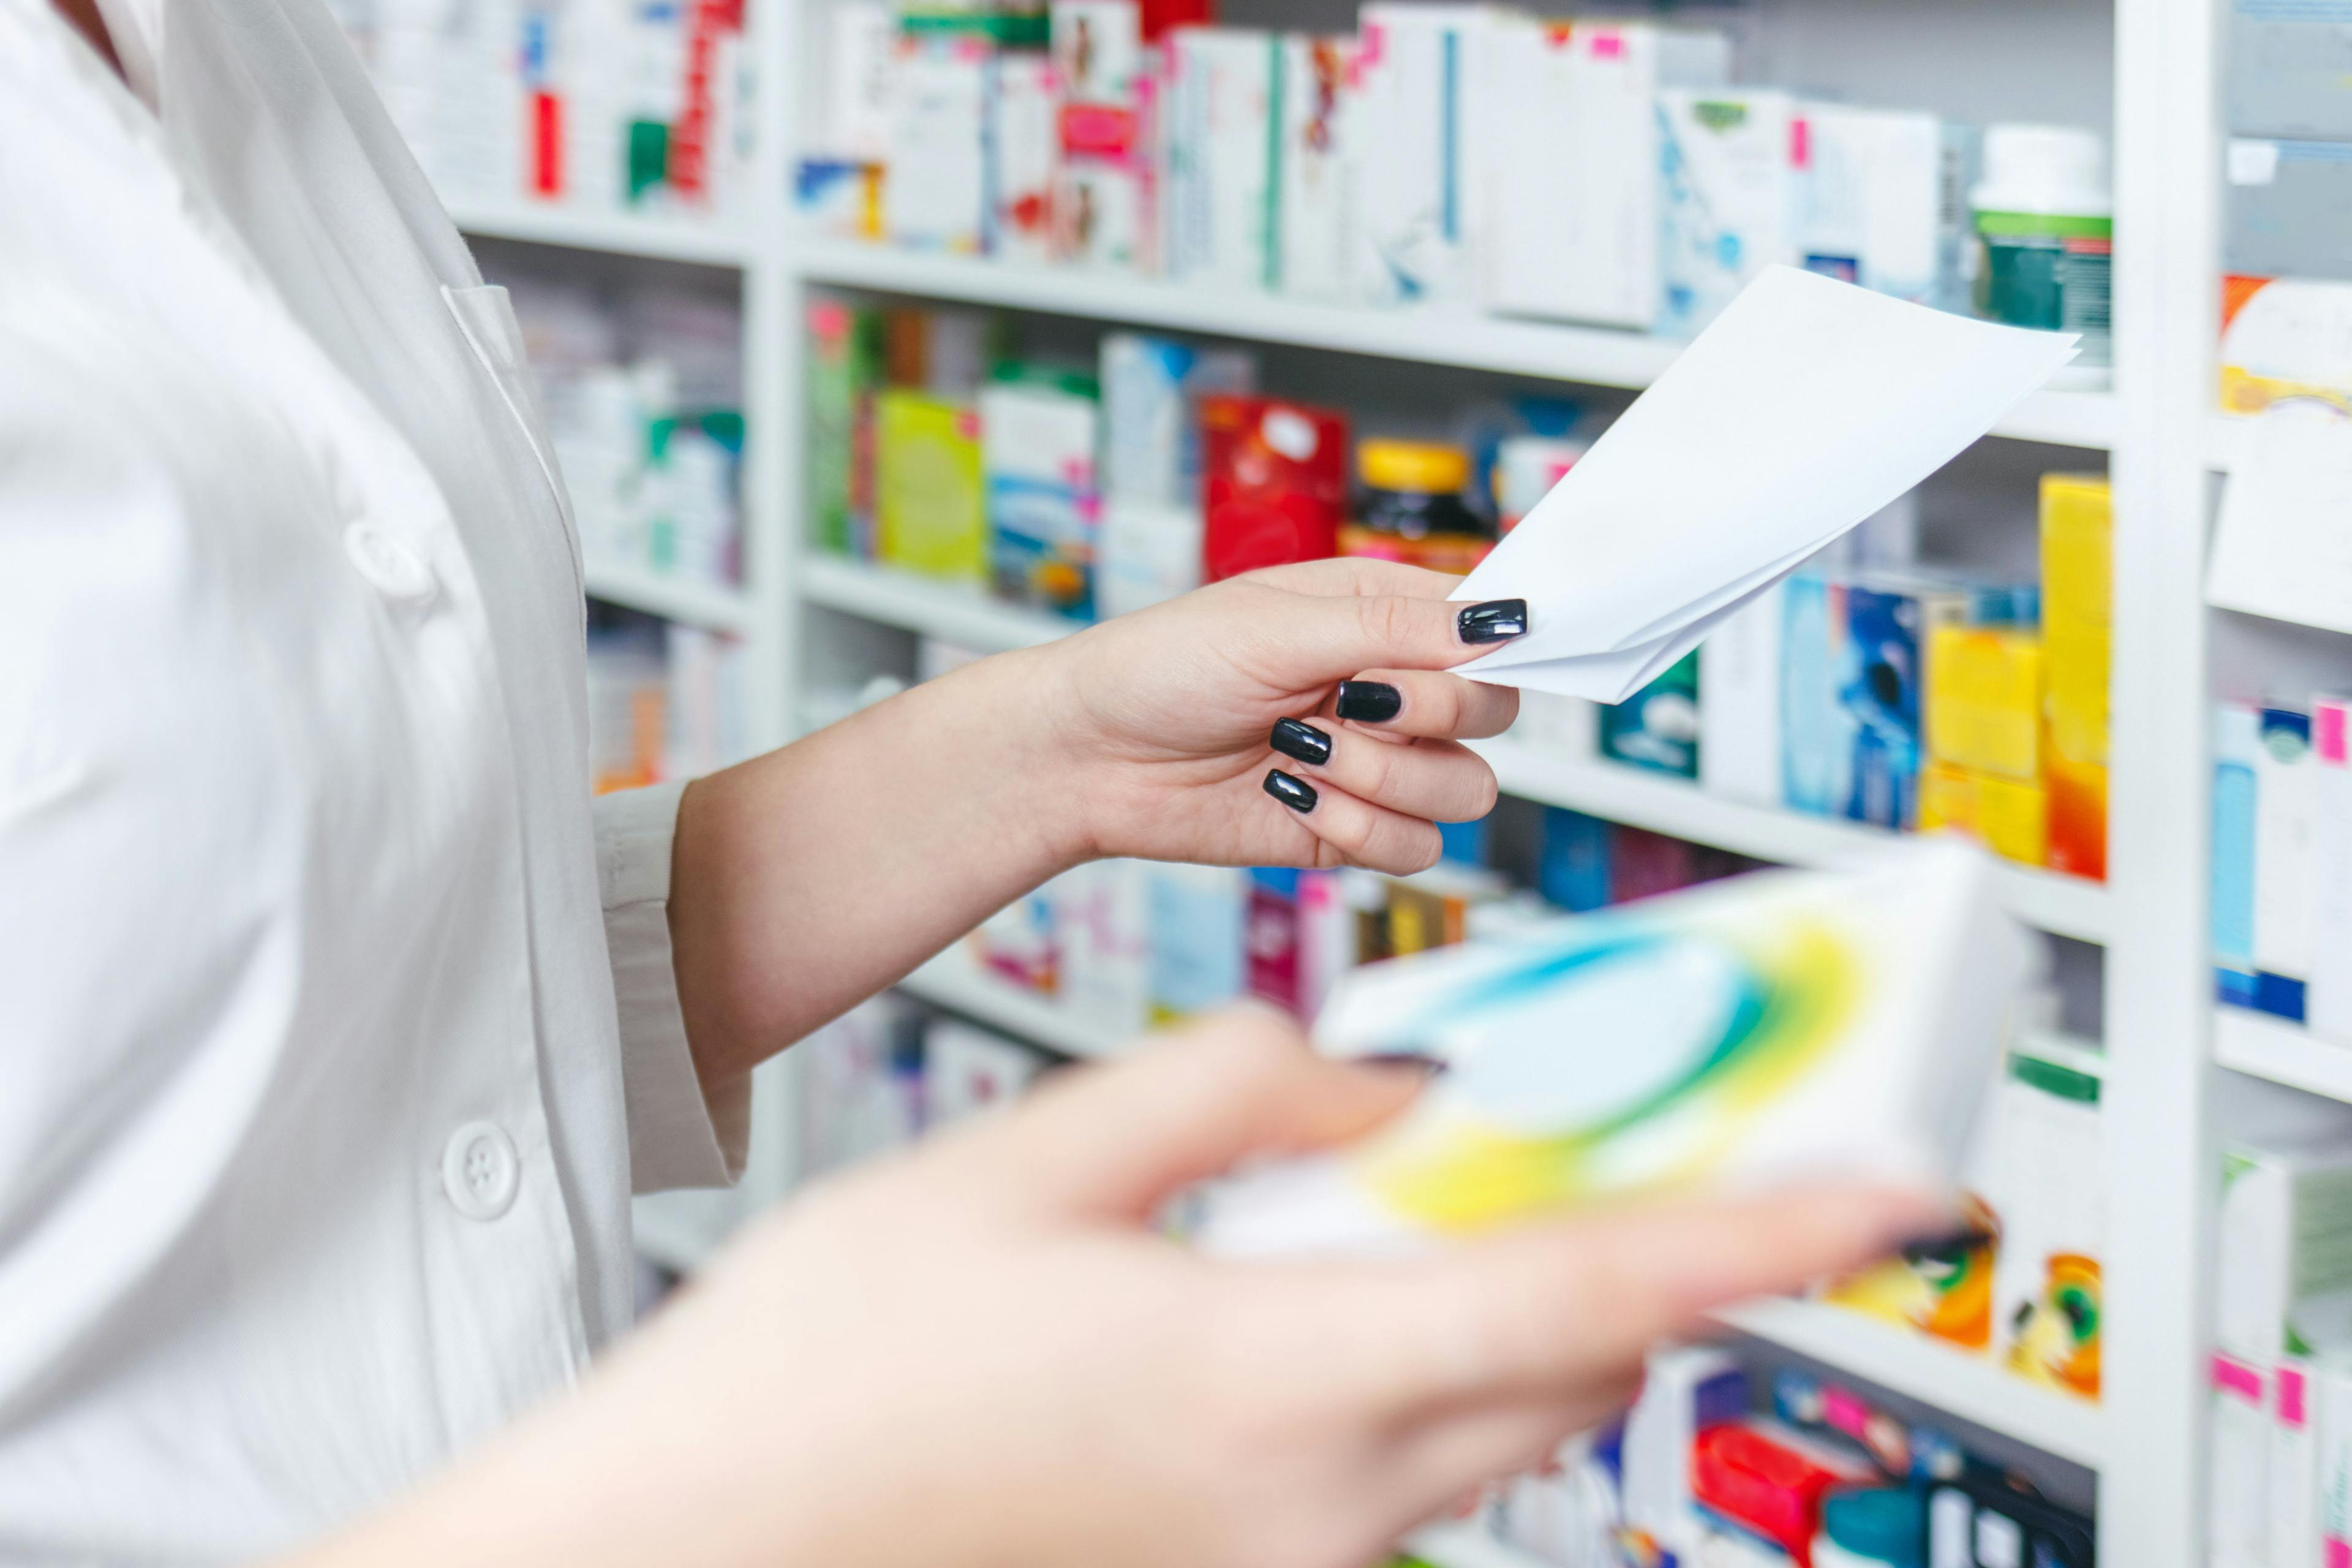 Pharmacy relations 101: Common sources of error and prevention strategies, part 2